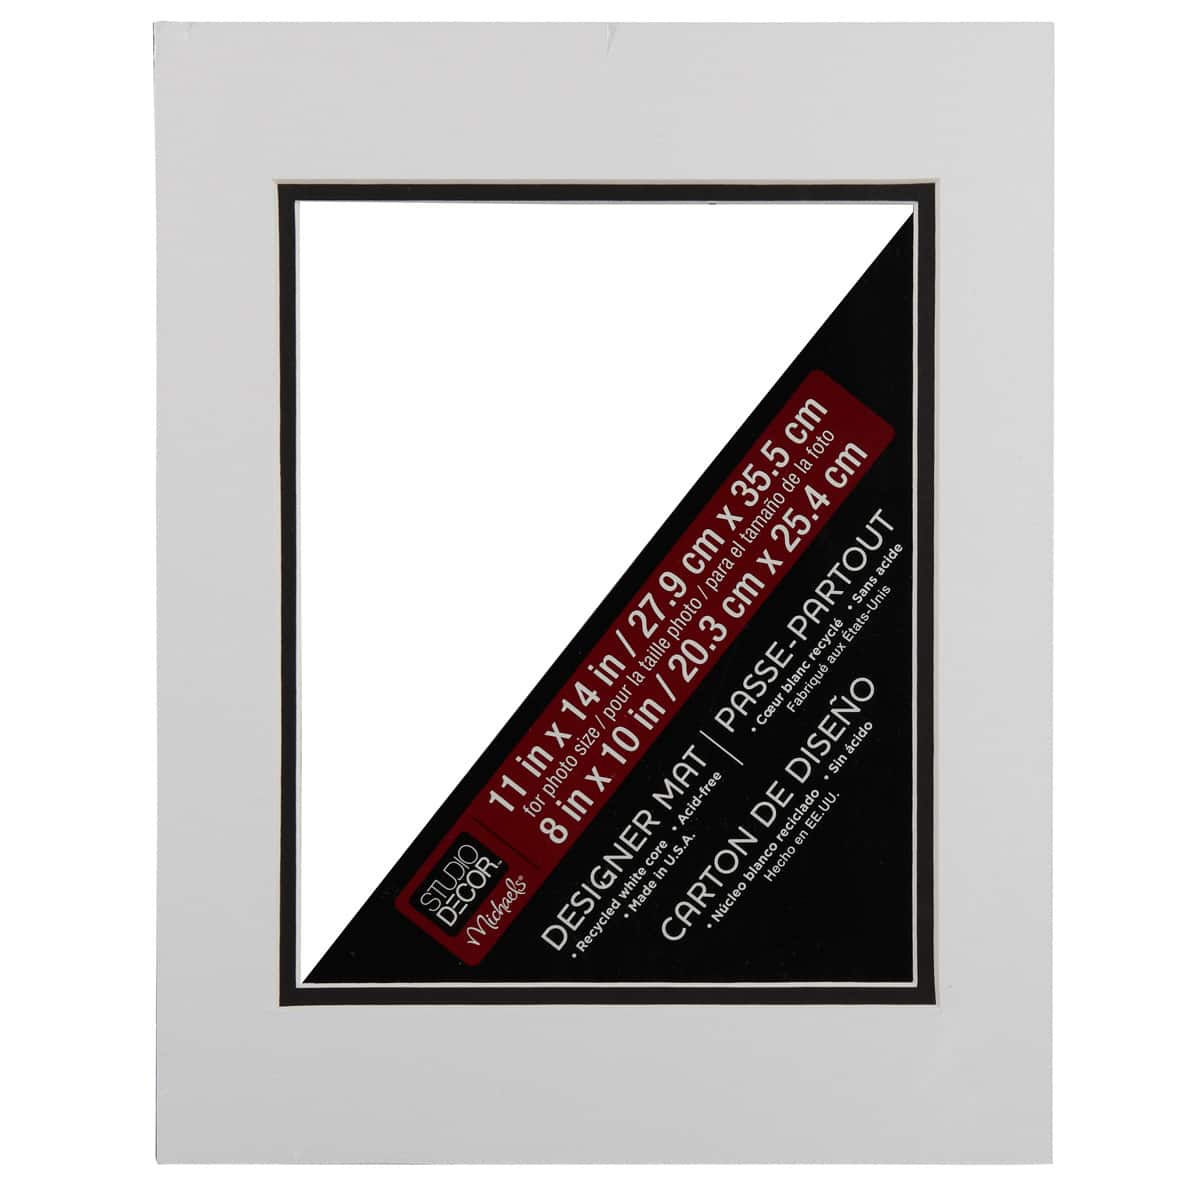 CustomPictureFrames 18x24 White Picture Mats with White Core for 13x19 Pictures - Fits 18x24 Frame